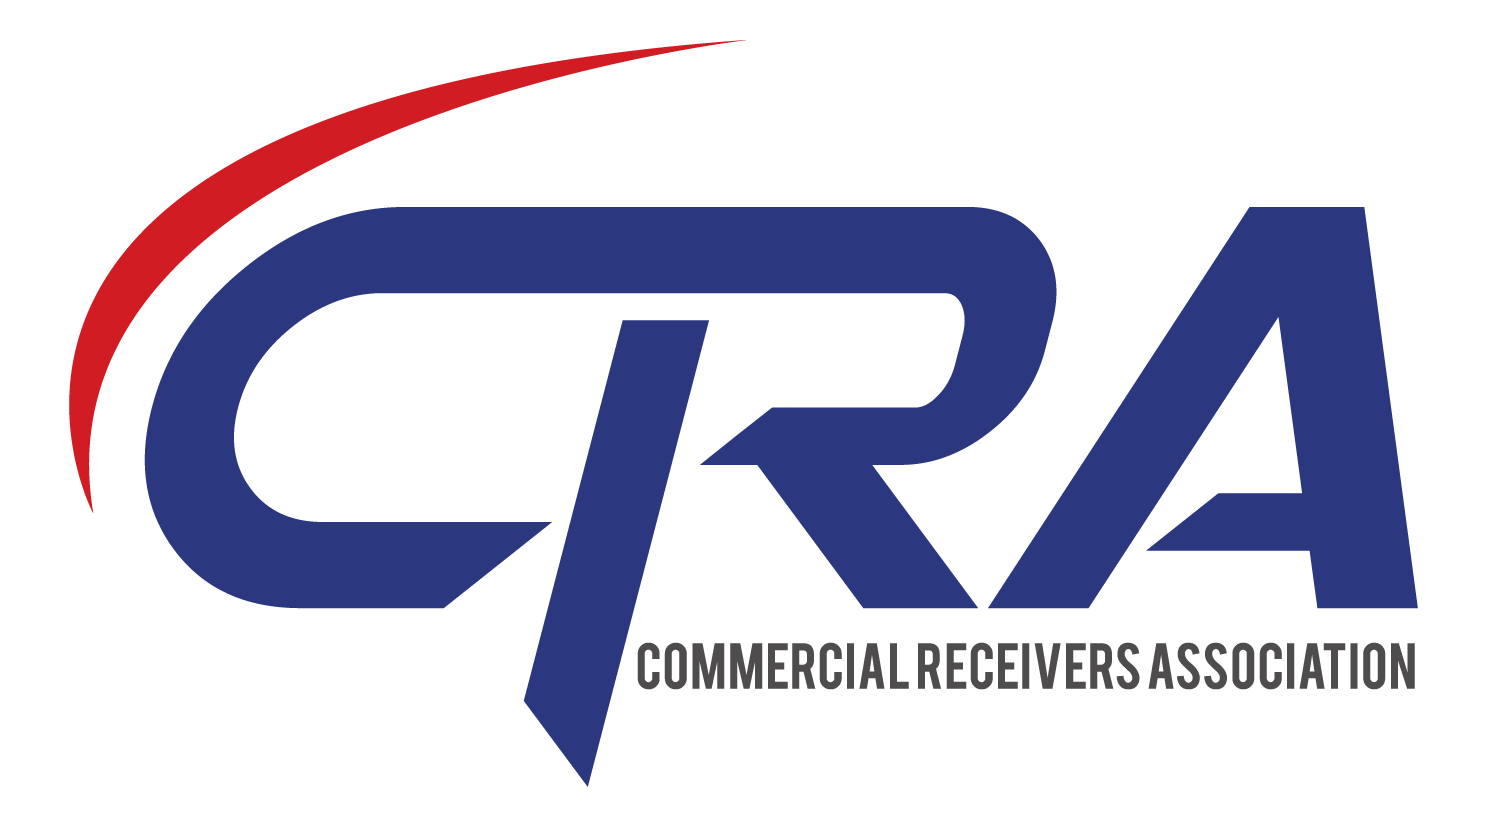 Commerical Receivers Association